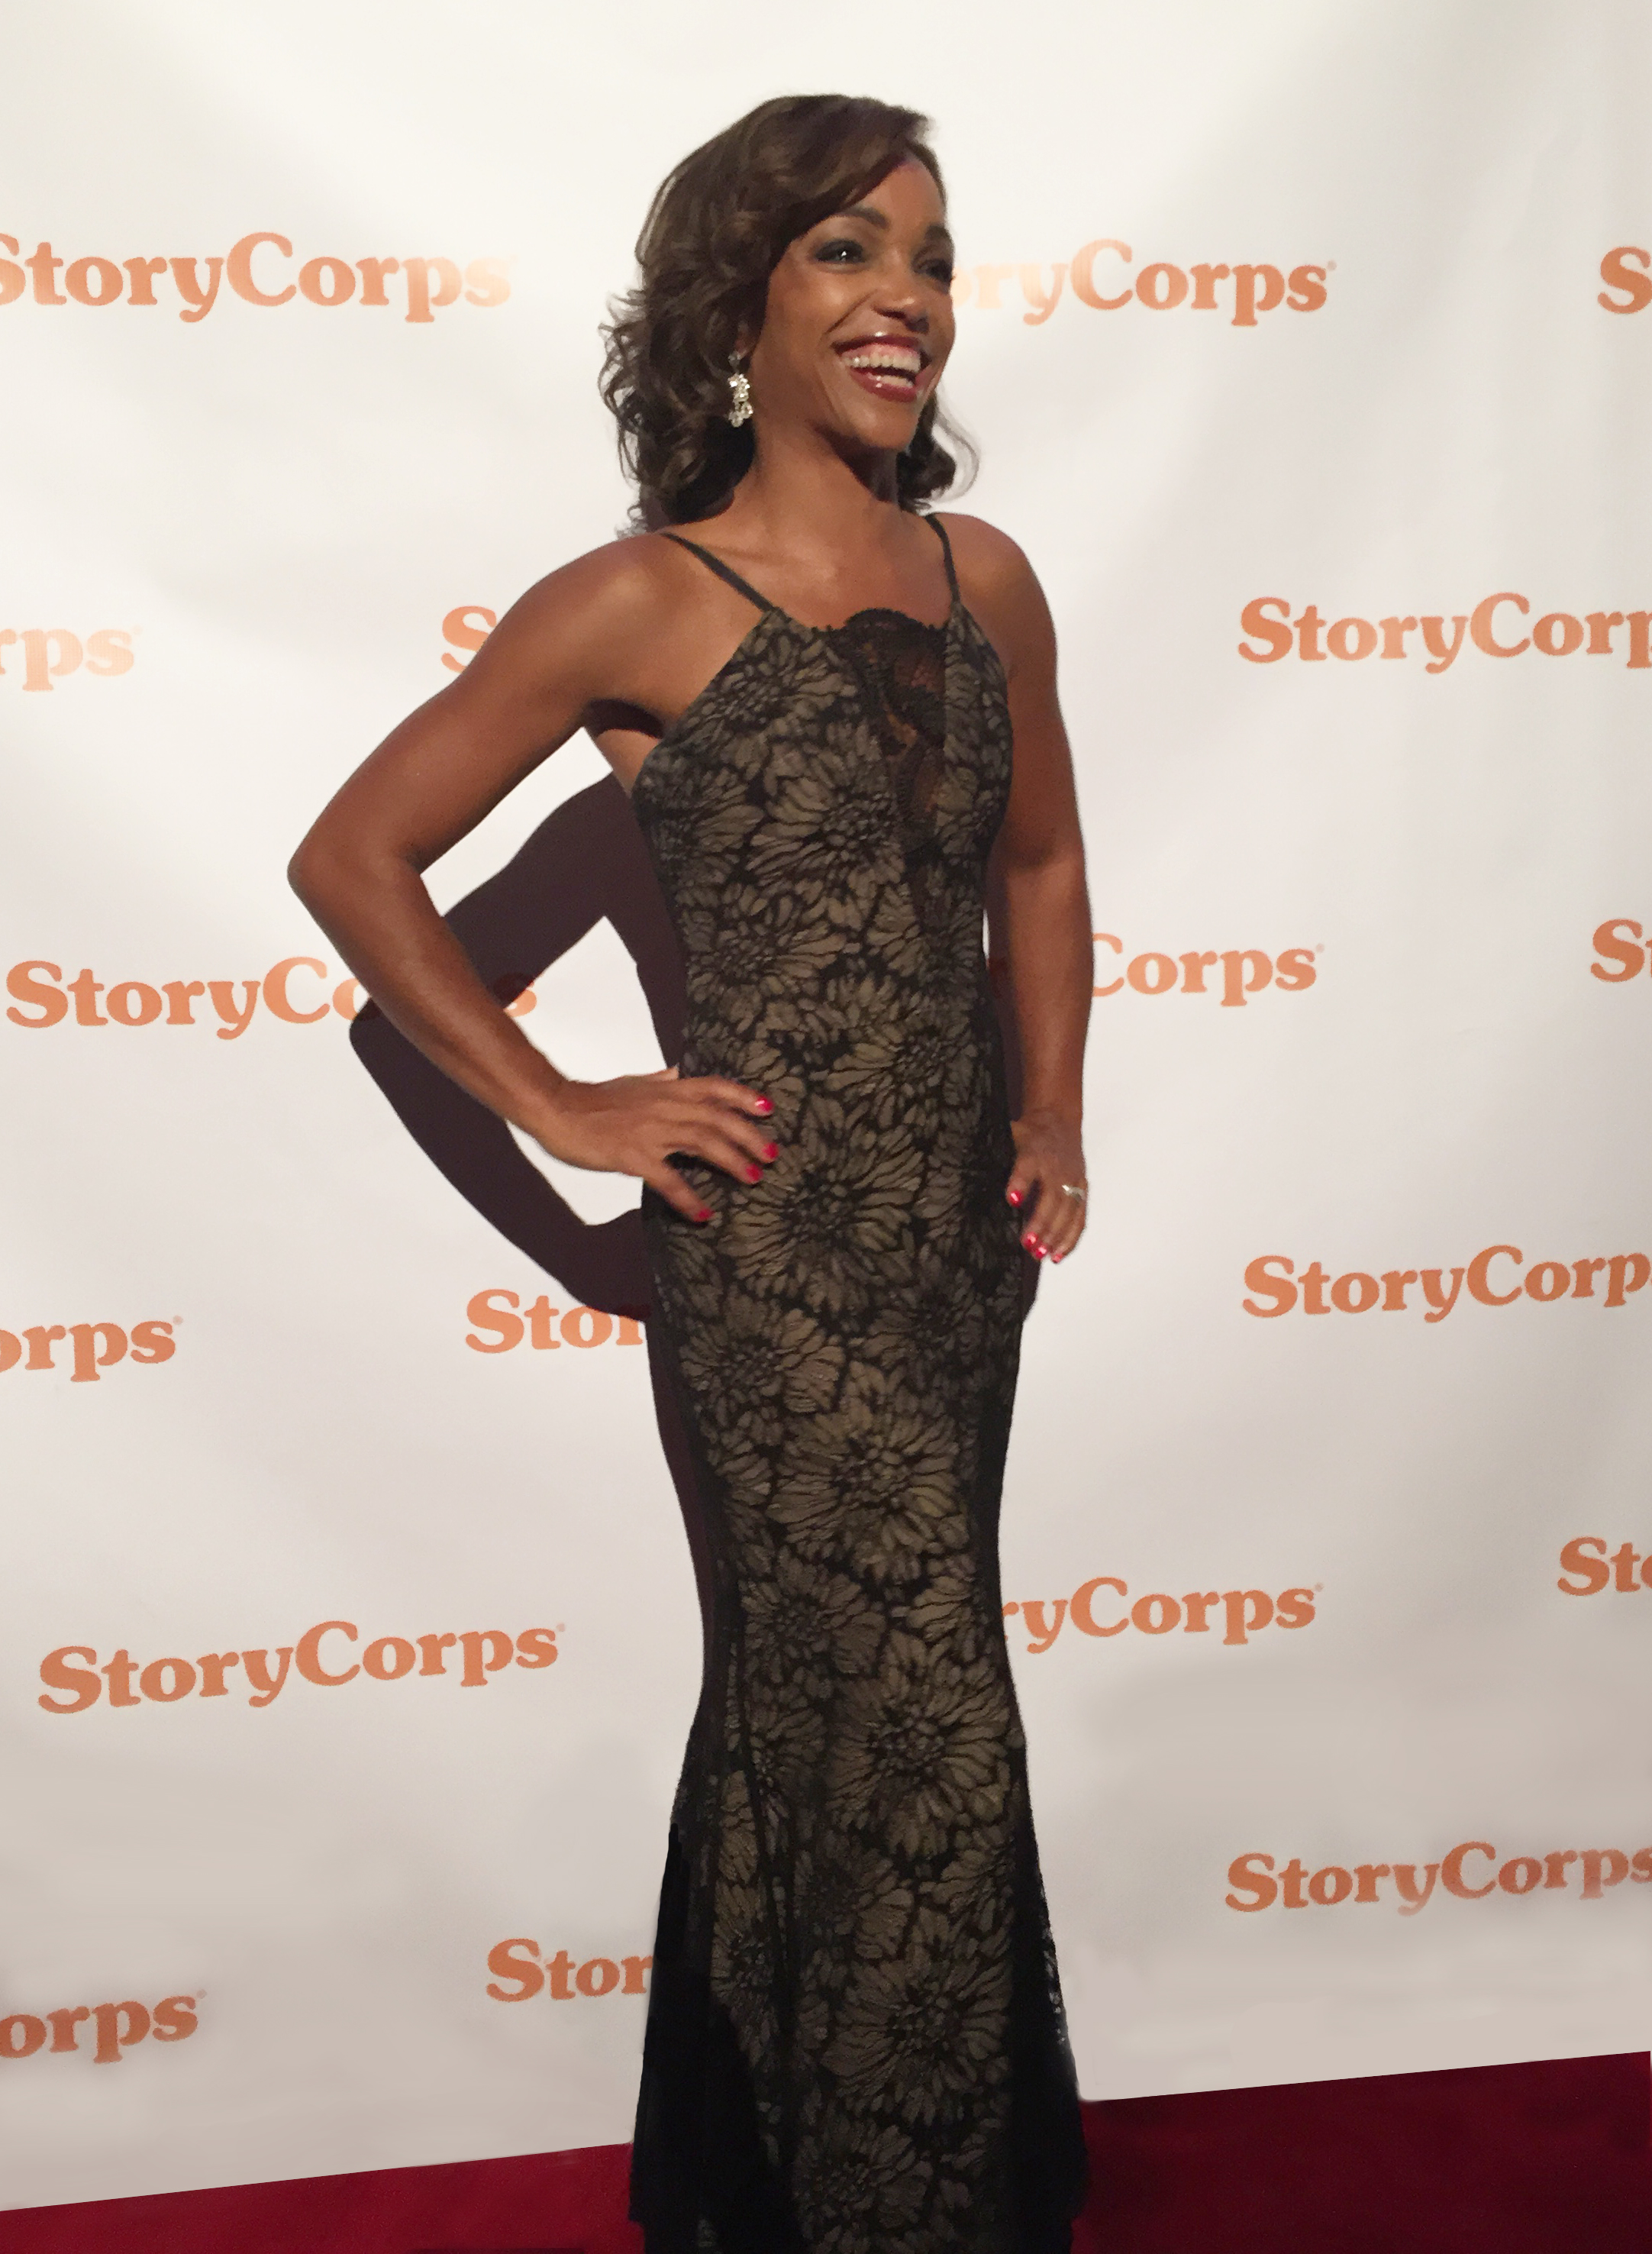 Valisa Tate attends StoryCorps Annual Gala at Capitale in New York City.